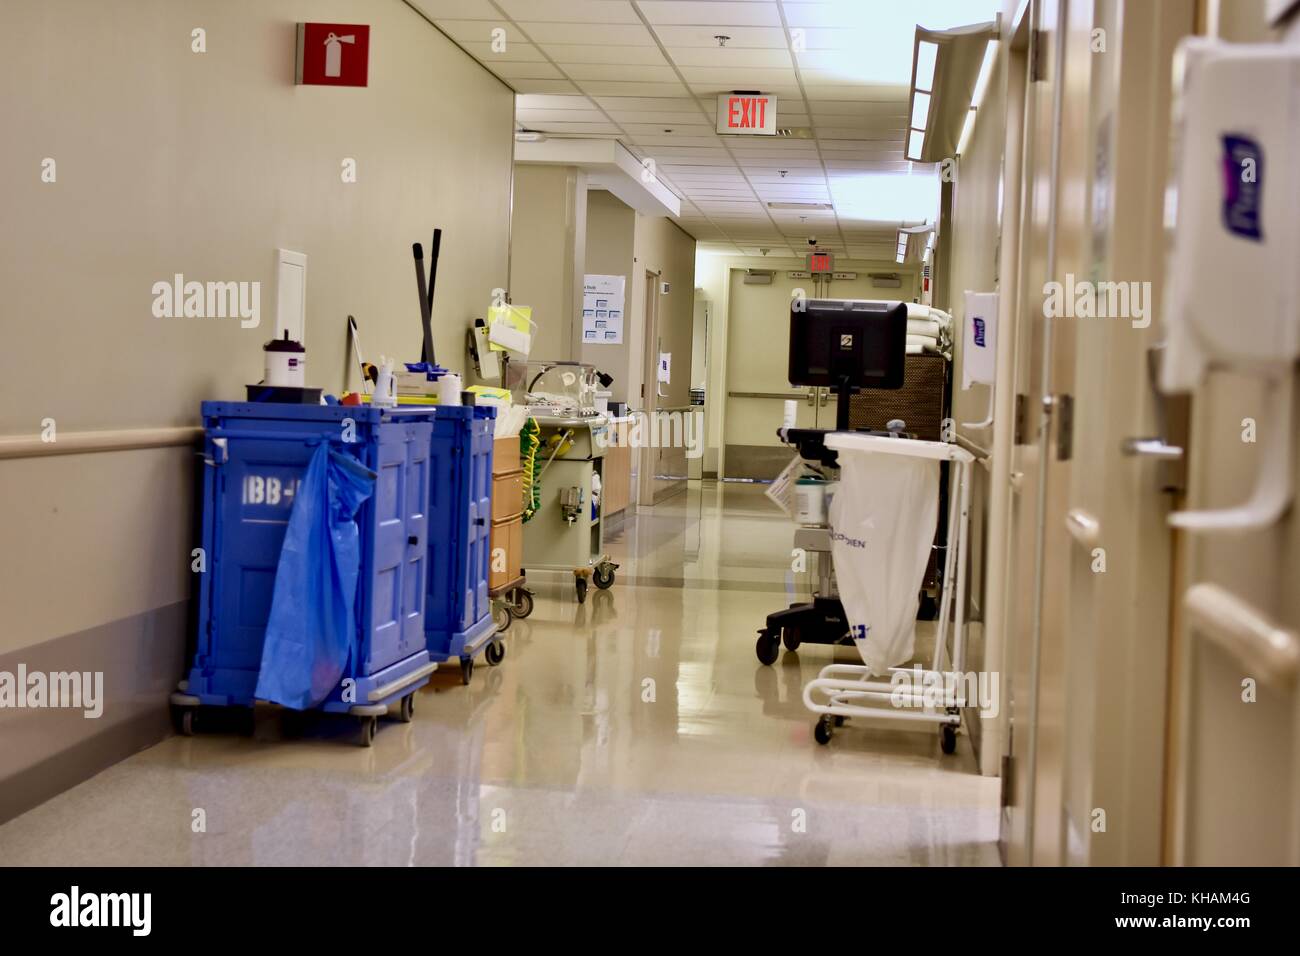 Hospital hallway with cleaning supplies Stock Photo